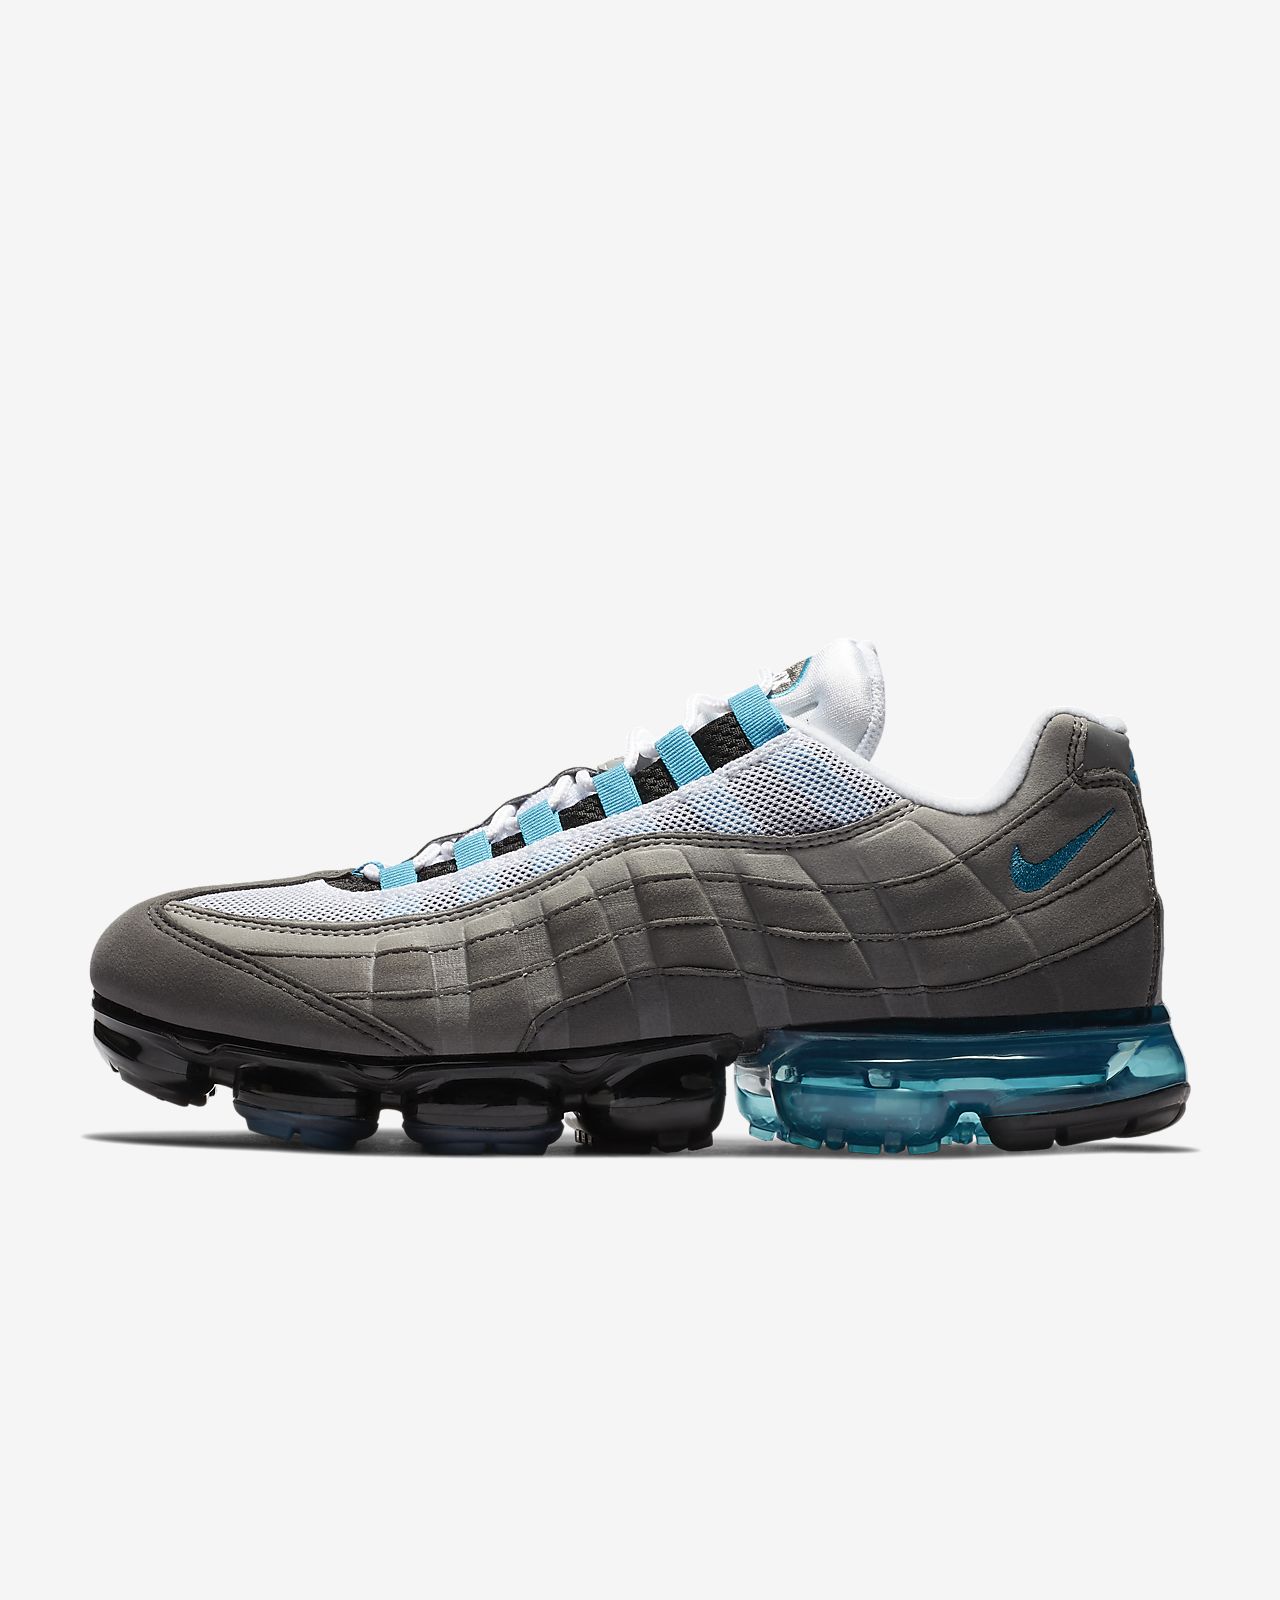 air max 95 with vapormax bottom